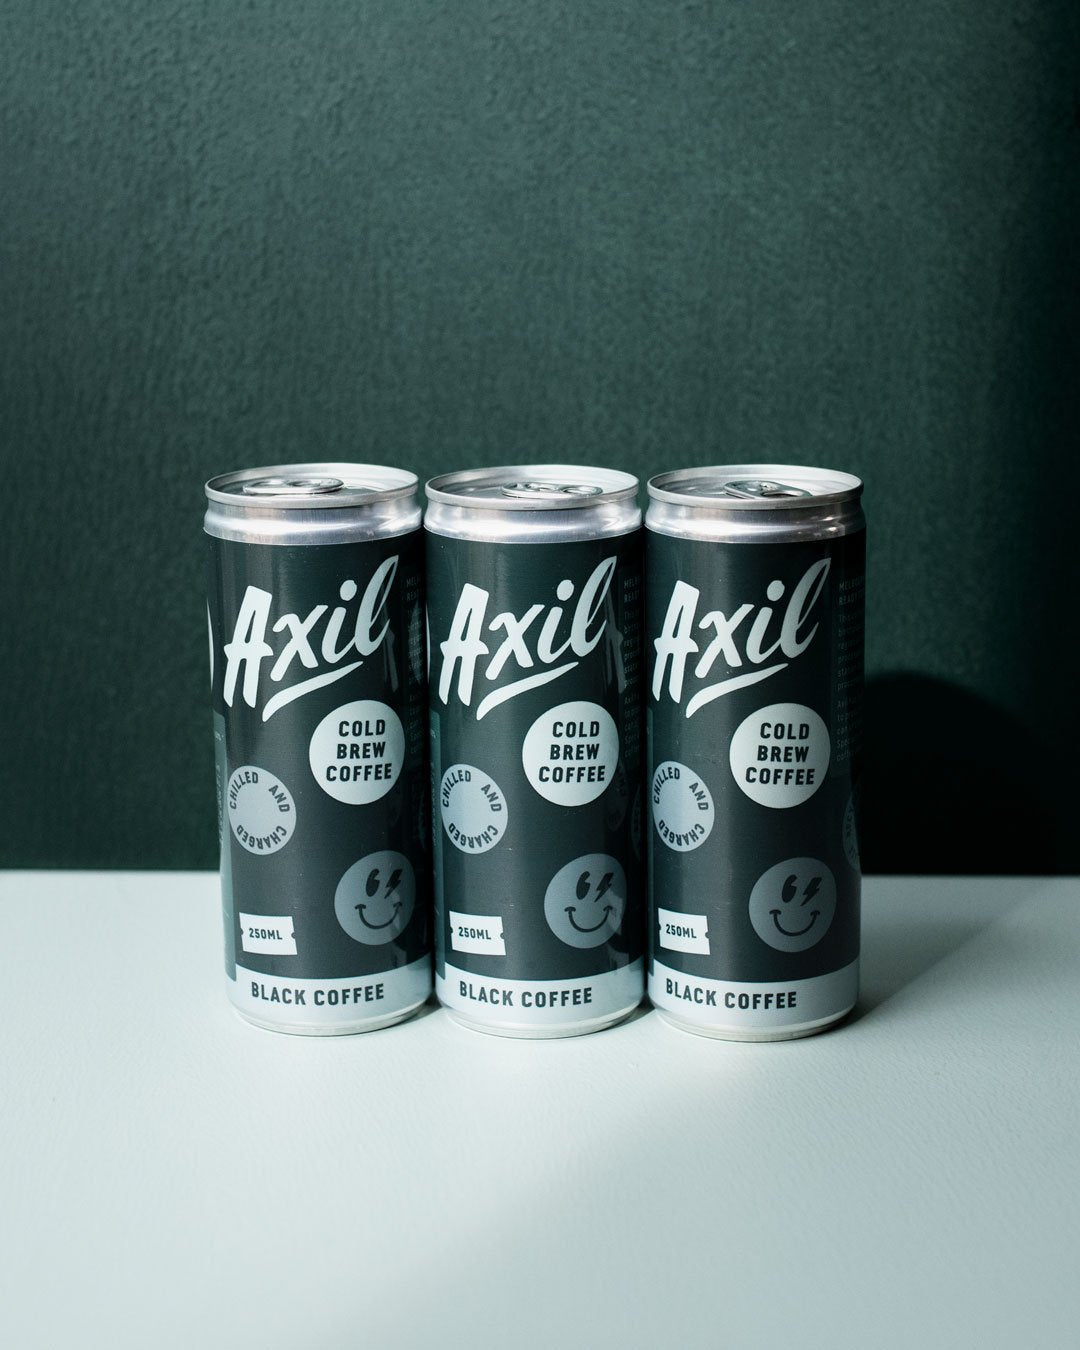 Cold Brew Cans have landed!